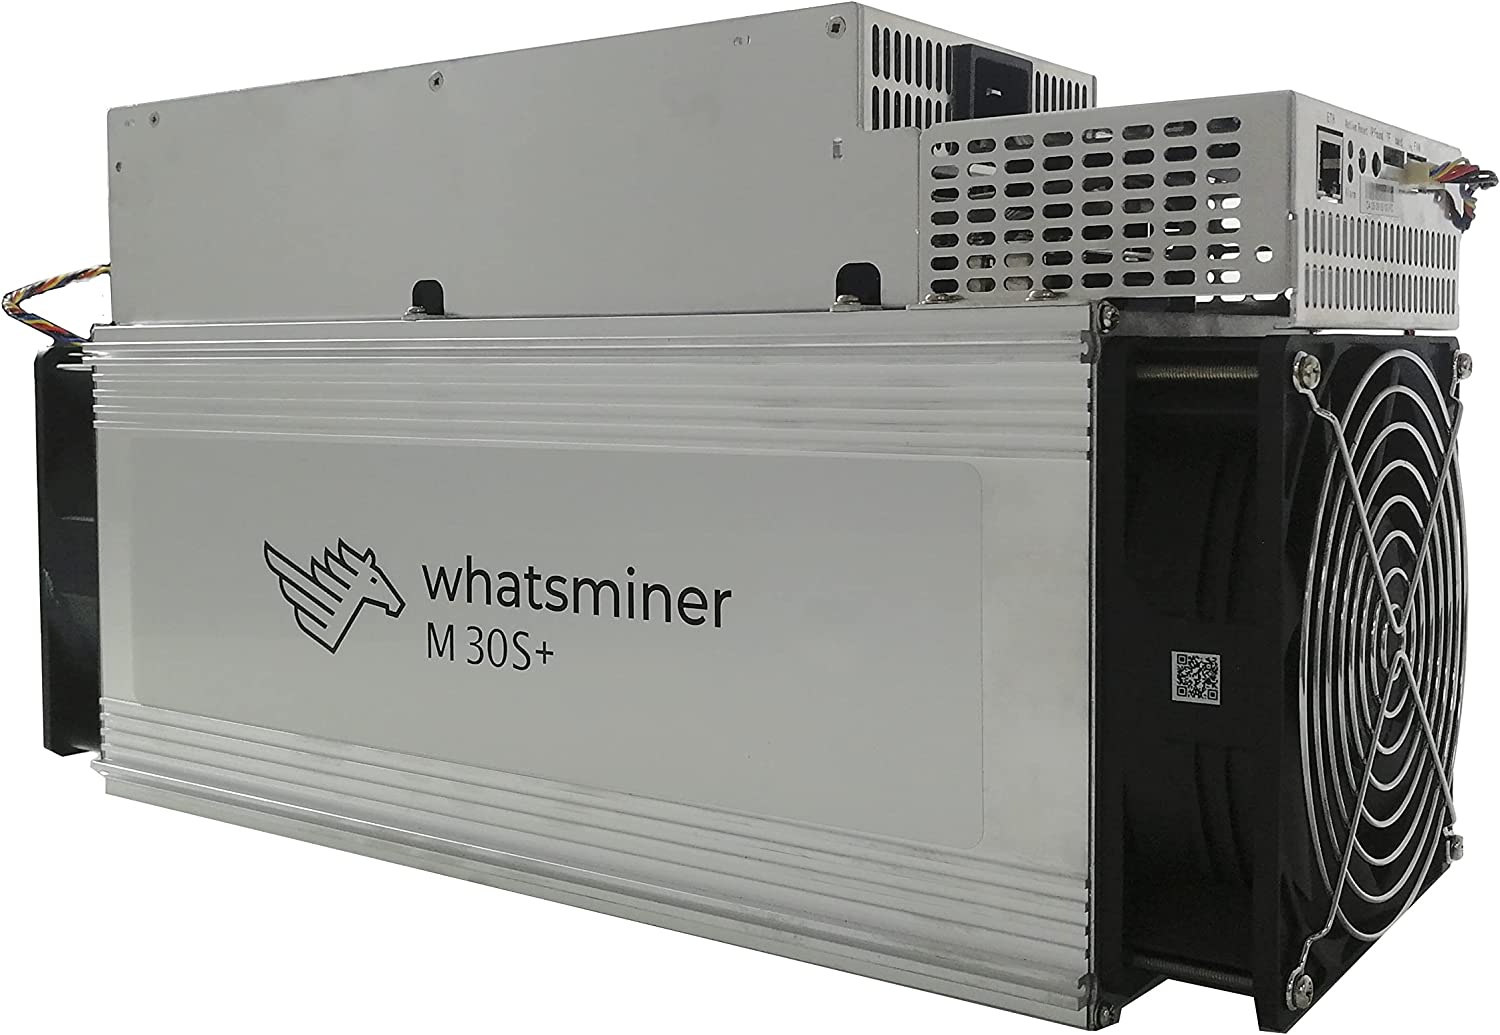 ASIC miner rig example.